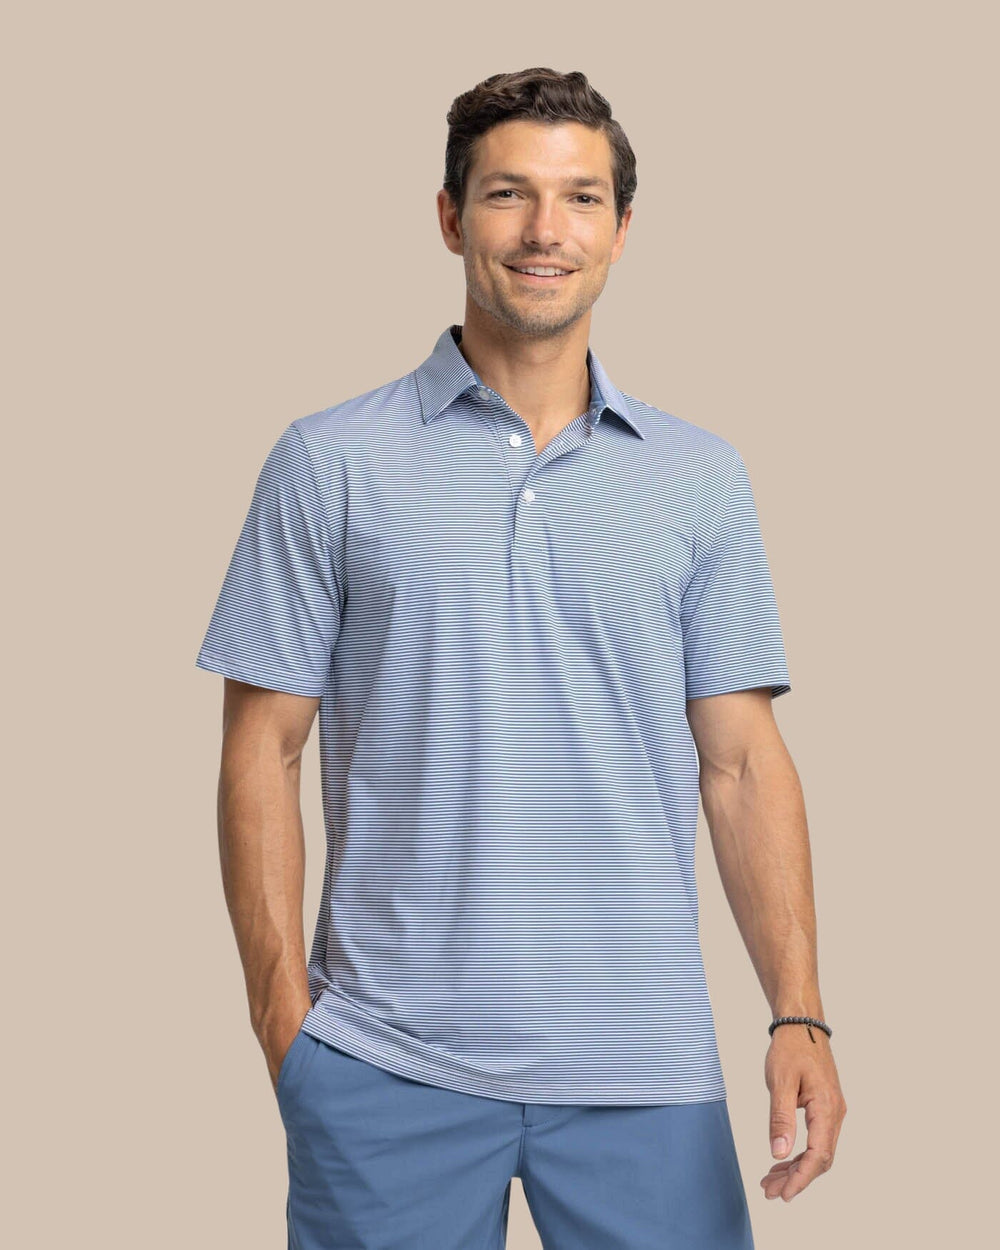 The front view of the Southern Tide brrr-eeze Meadowbrook Stripe Polo by Southern Tide - Aged Denim